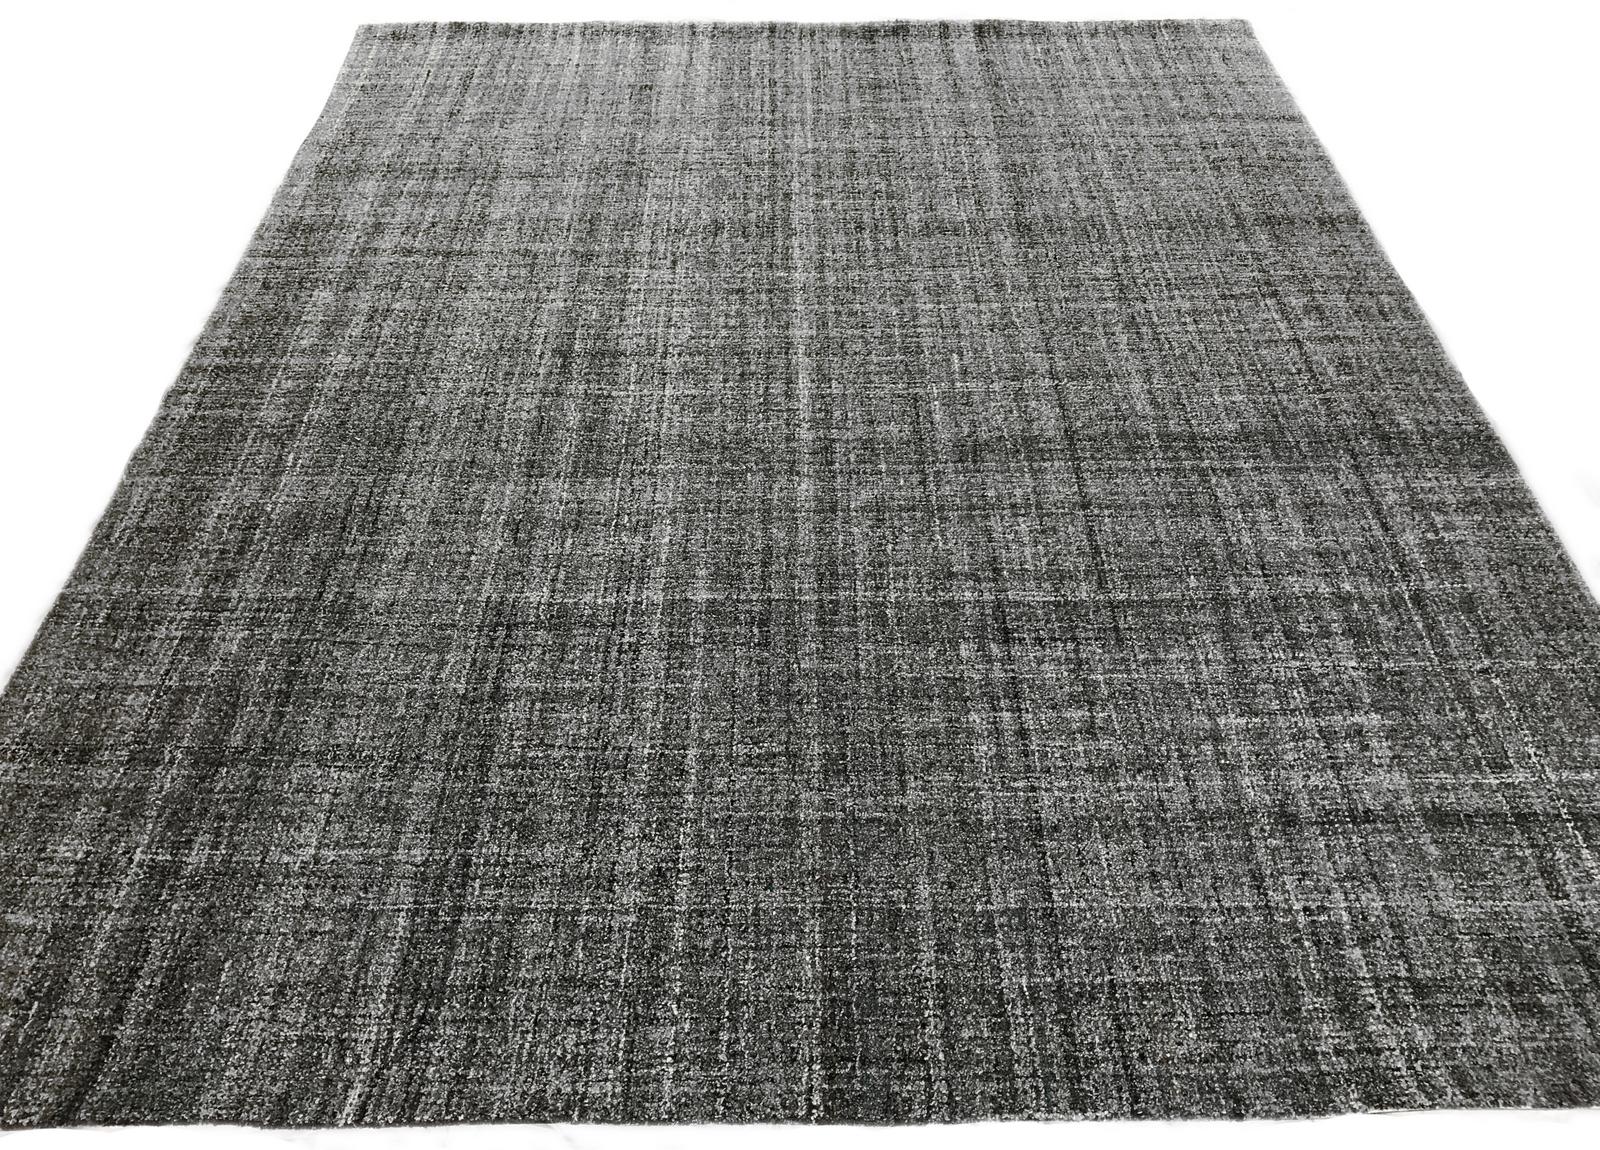 Create a contemporary foundation with this tufted gray Indian wool area rug. Dark gold and turquoise details bring an added element of color without compromising versatility.